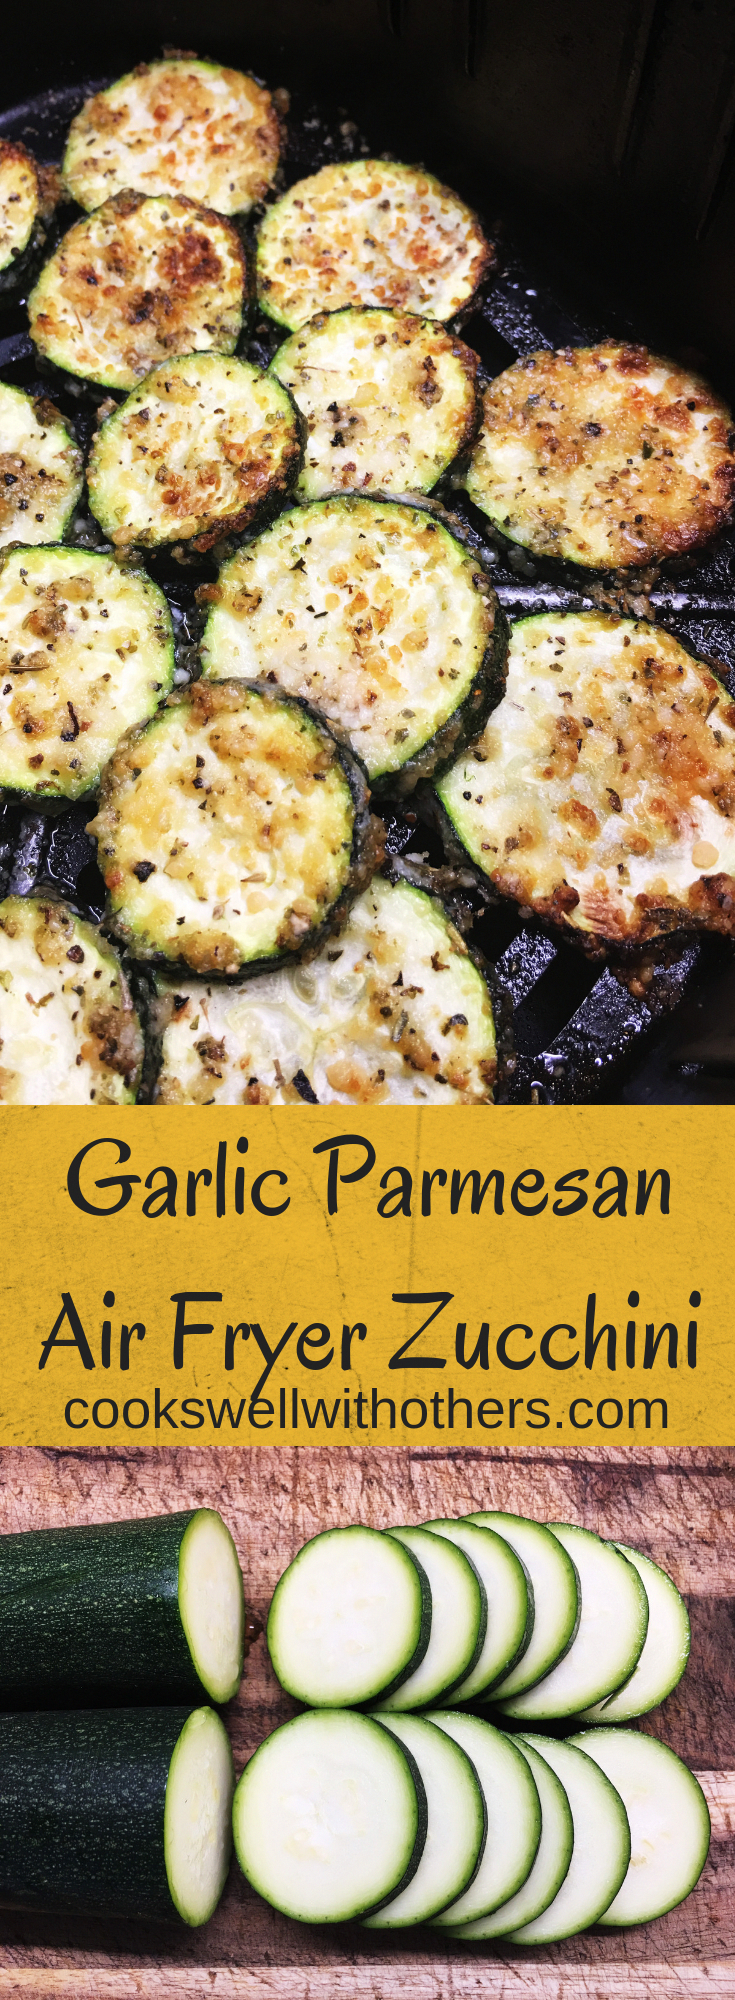 Garlic Parmesan Air Fryer Zucchini - Cooks Well With Others -   19 air fryer recipes healthy vegetables ideas